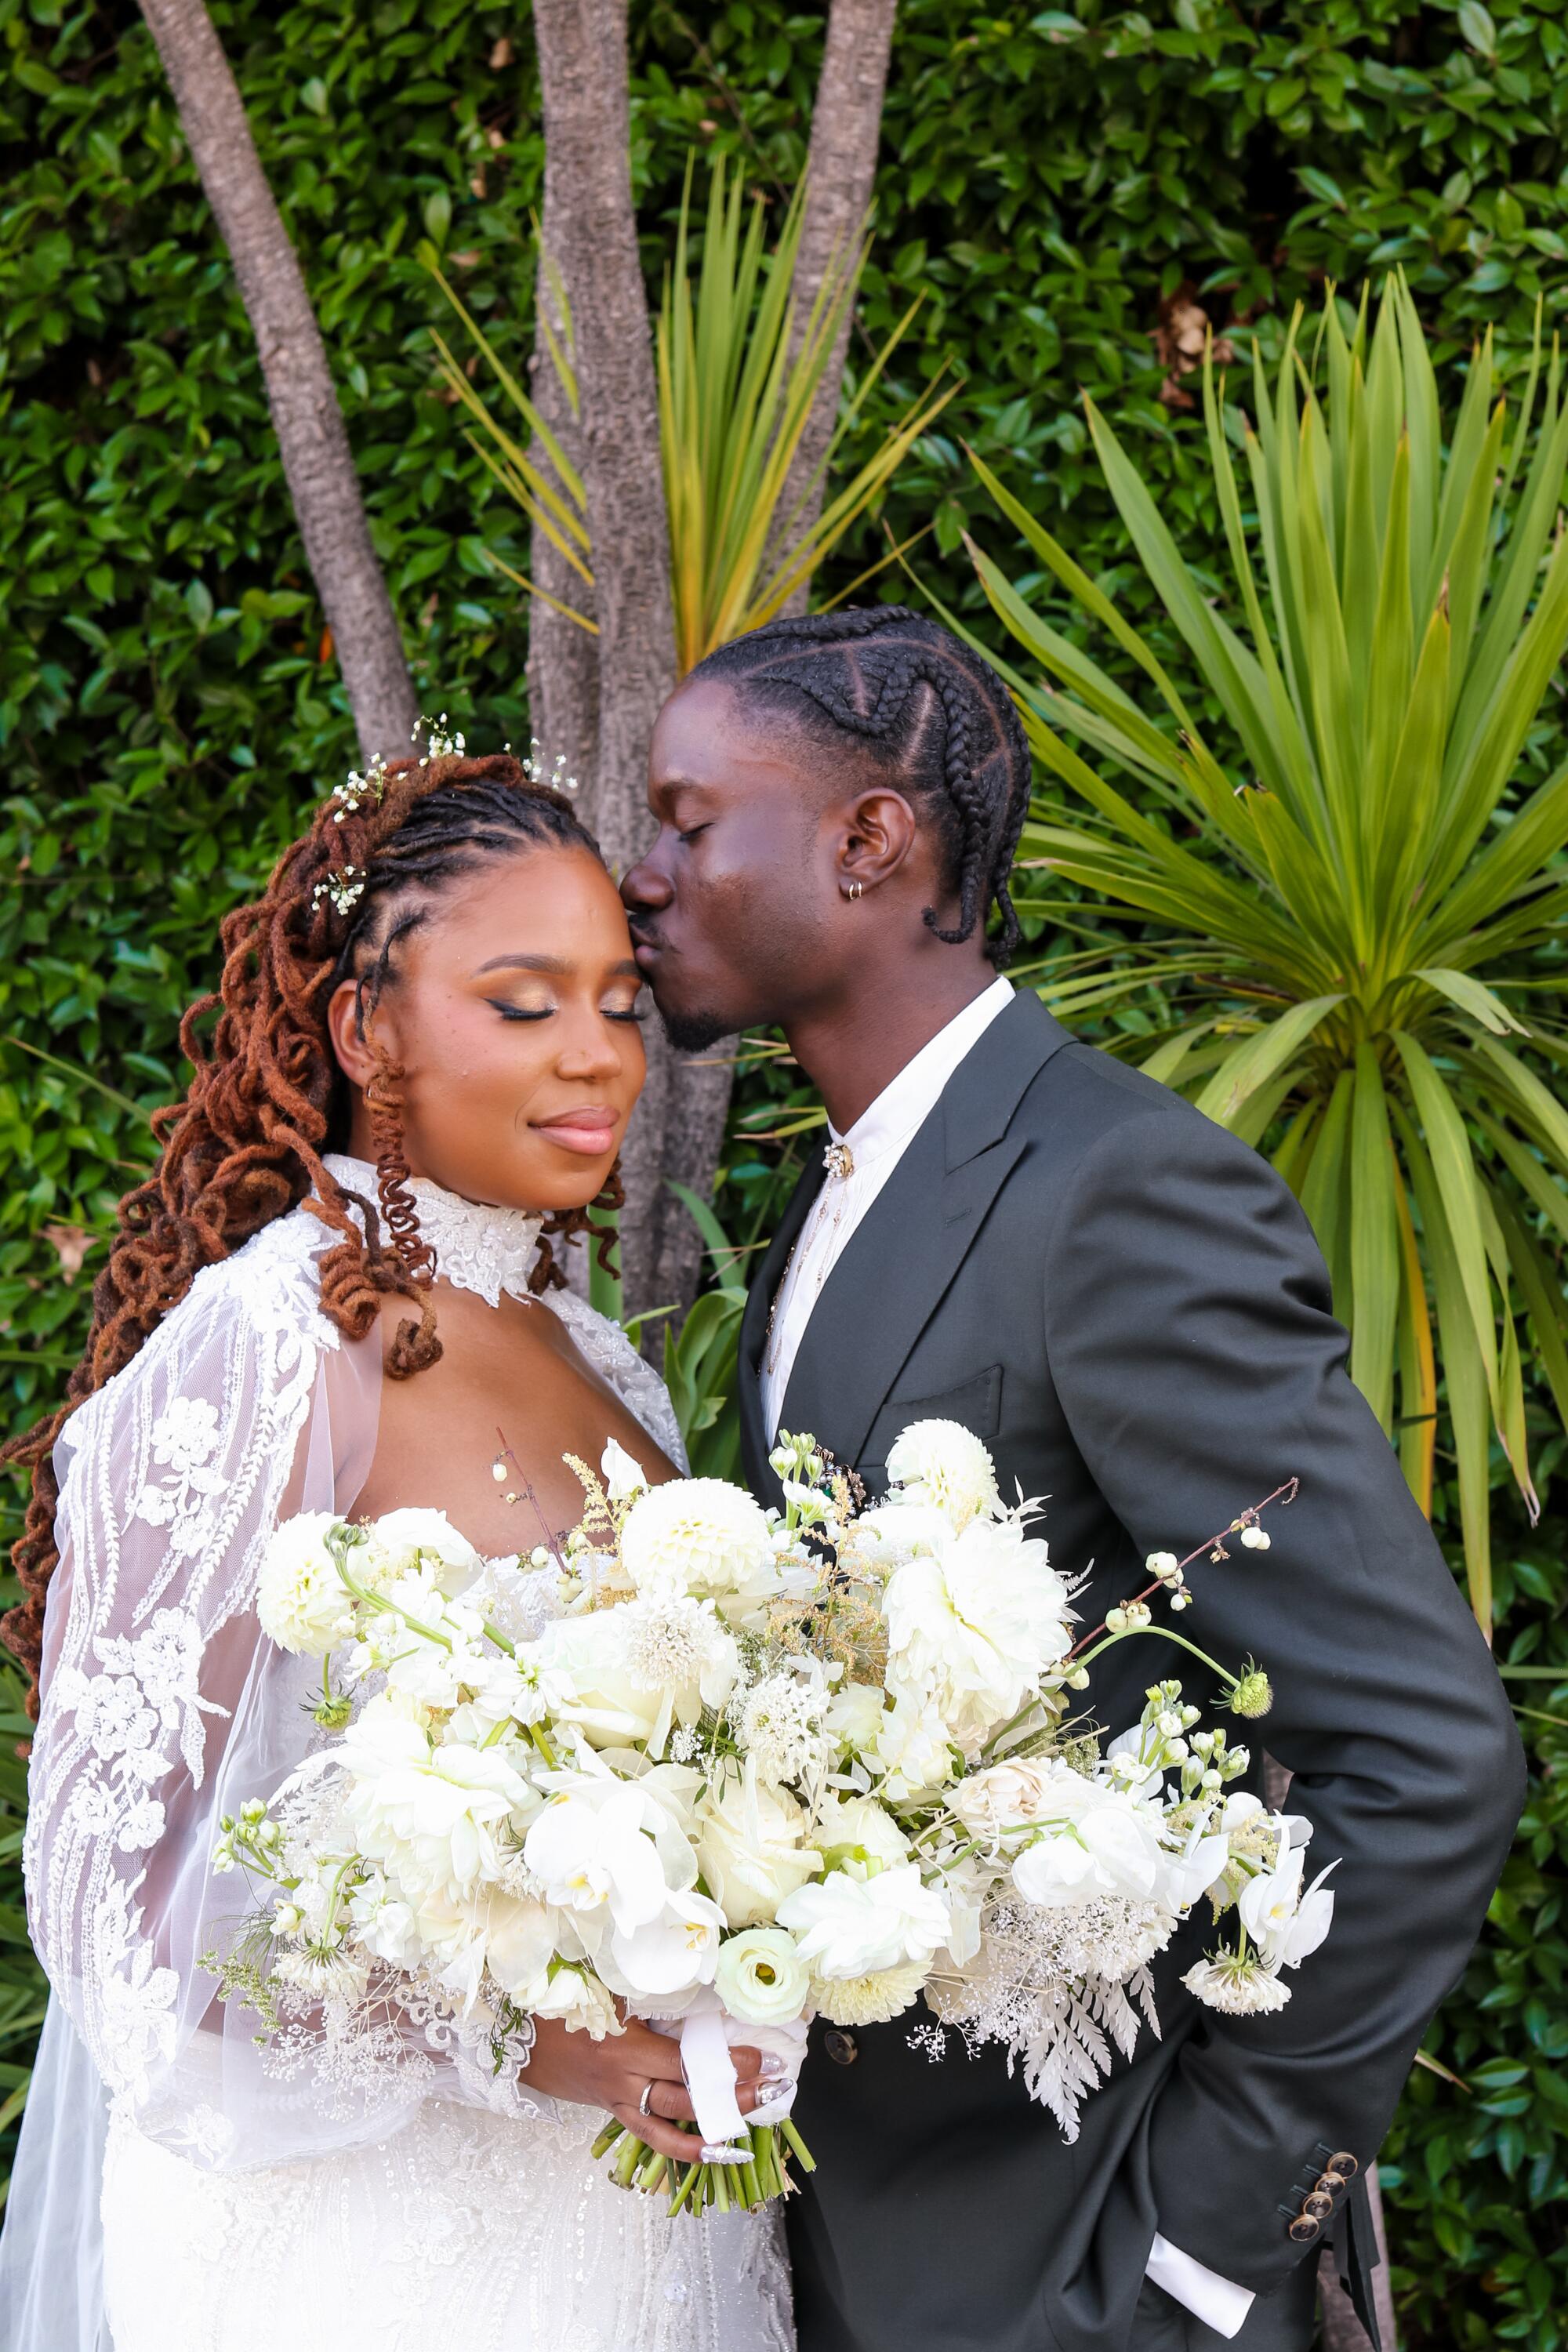 A man in a dark suit kisses his bride's forehead. She holds a big bouquet of white flowers.